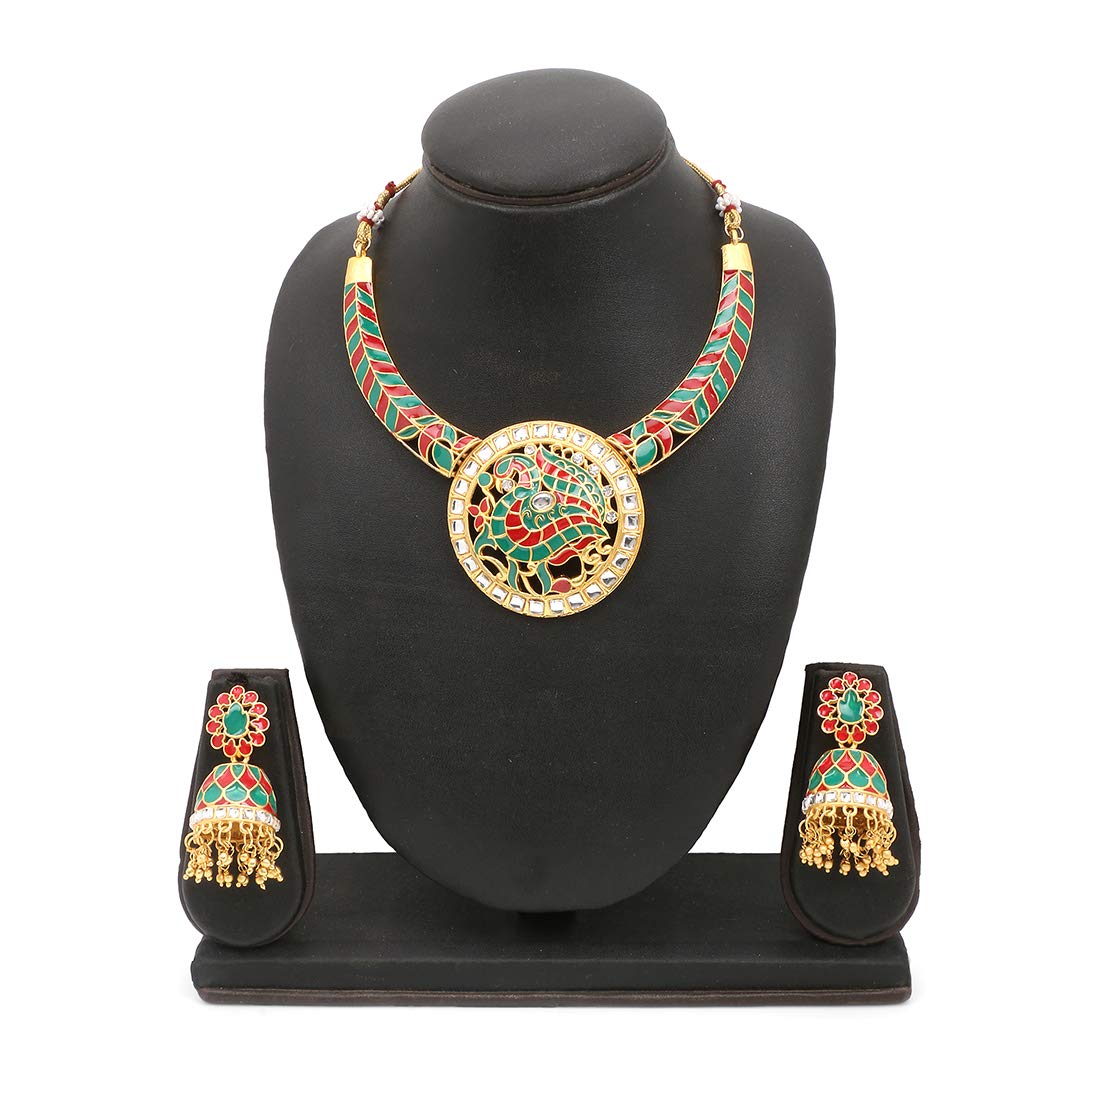 Yellow Chimes Kundan Meenakari Jewellery Set Traditional Gold Plated Antique Designer Choker Necklace with Earrings for Women and Girls